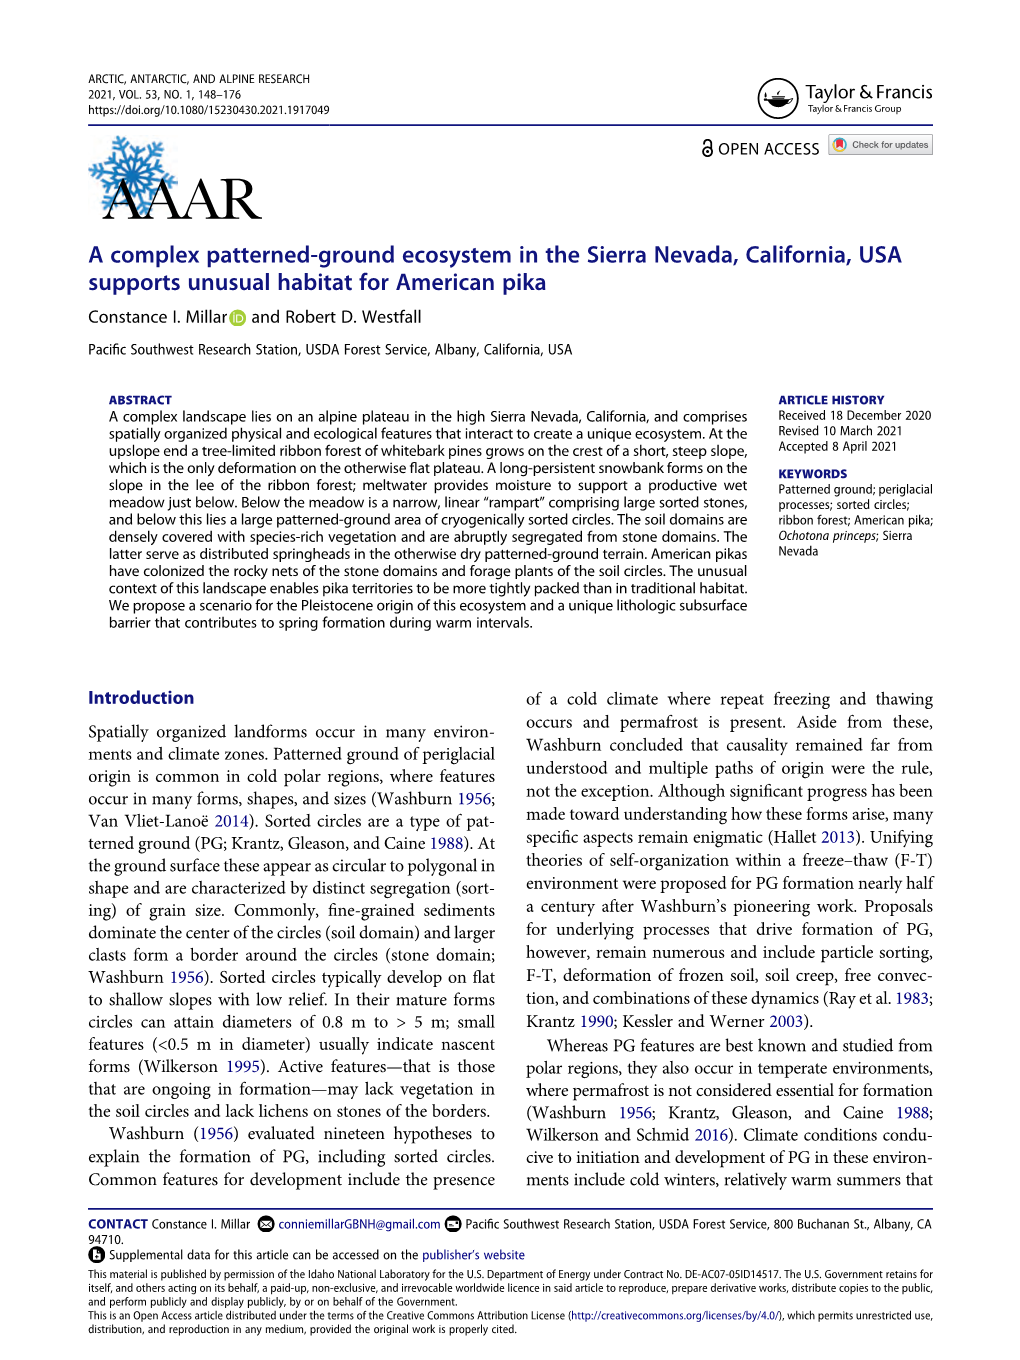 A Complex Patterned-Ground Ecosystem in the Sierra Nevada, California, USA Supports Unusual Habitat for American Pika Constance I